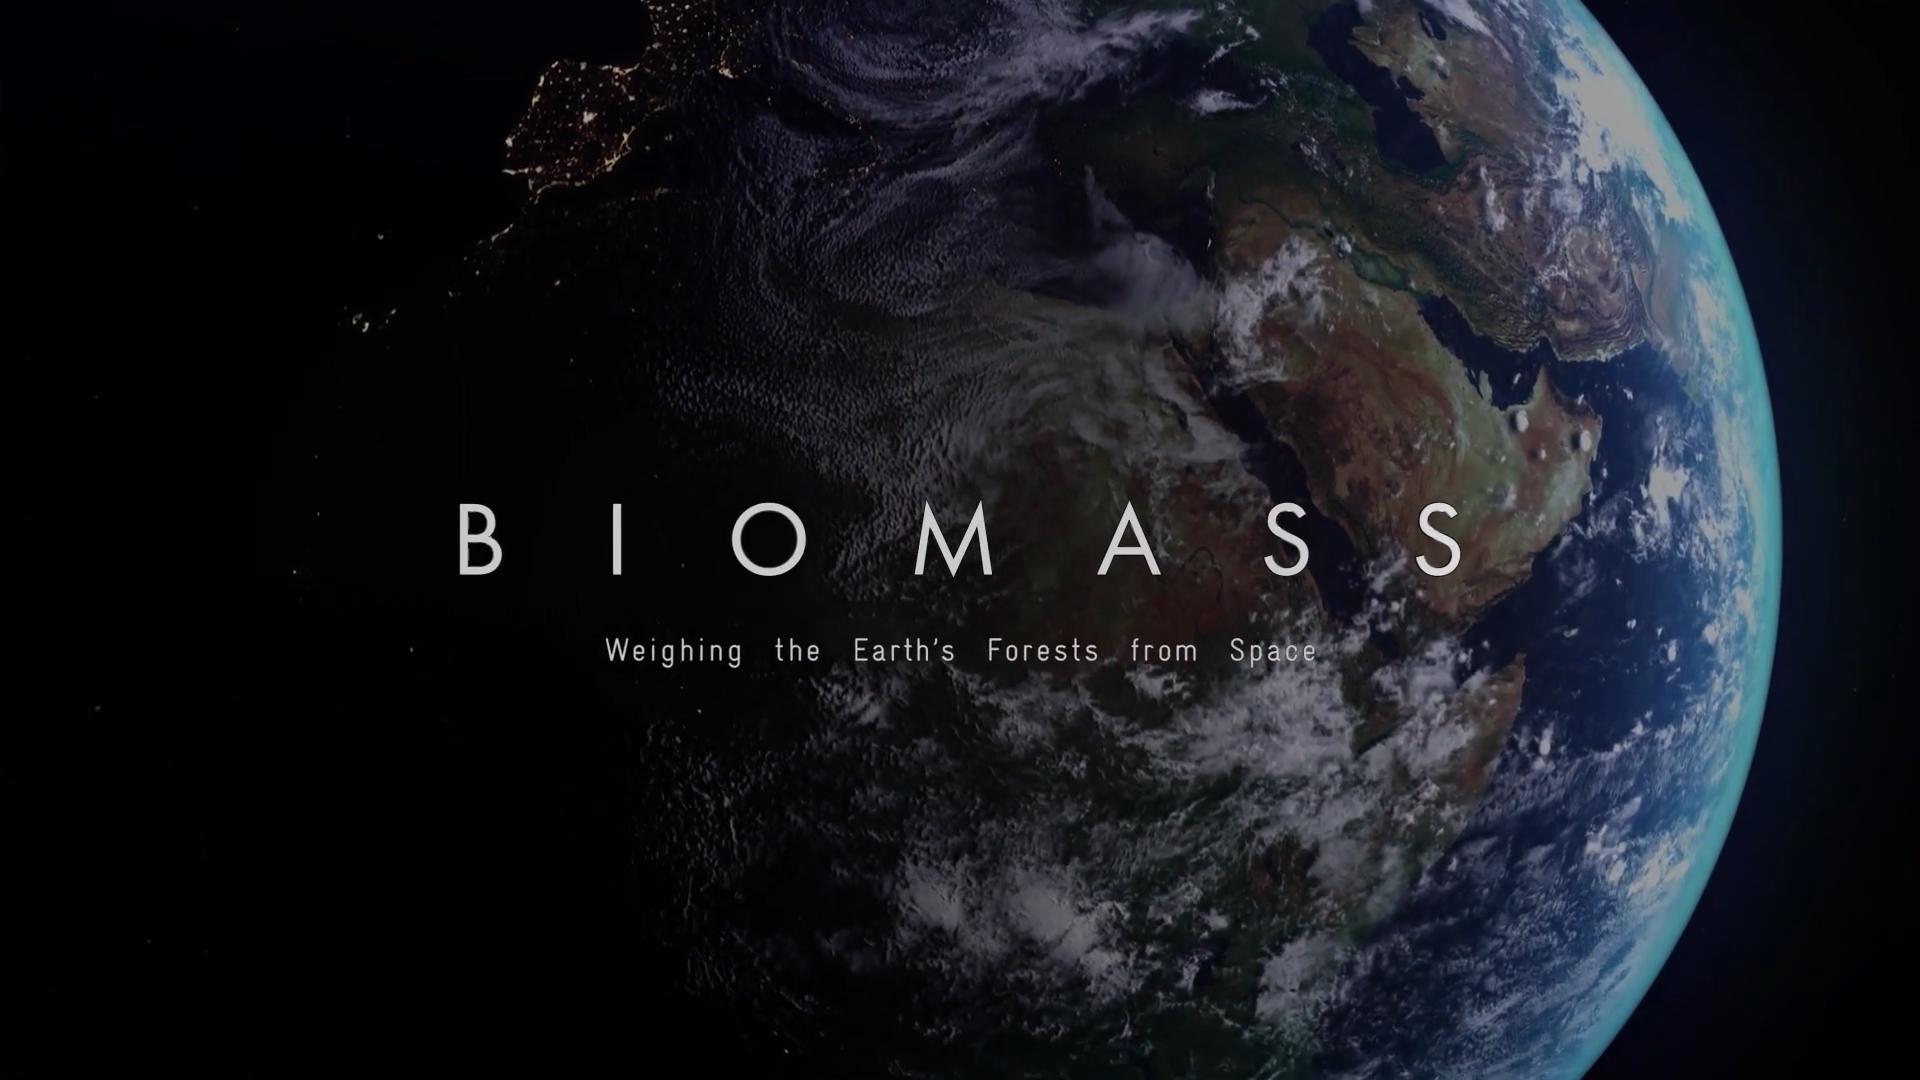 The earth from space overlaid with the text 'BIOMASS' 